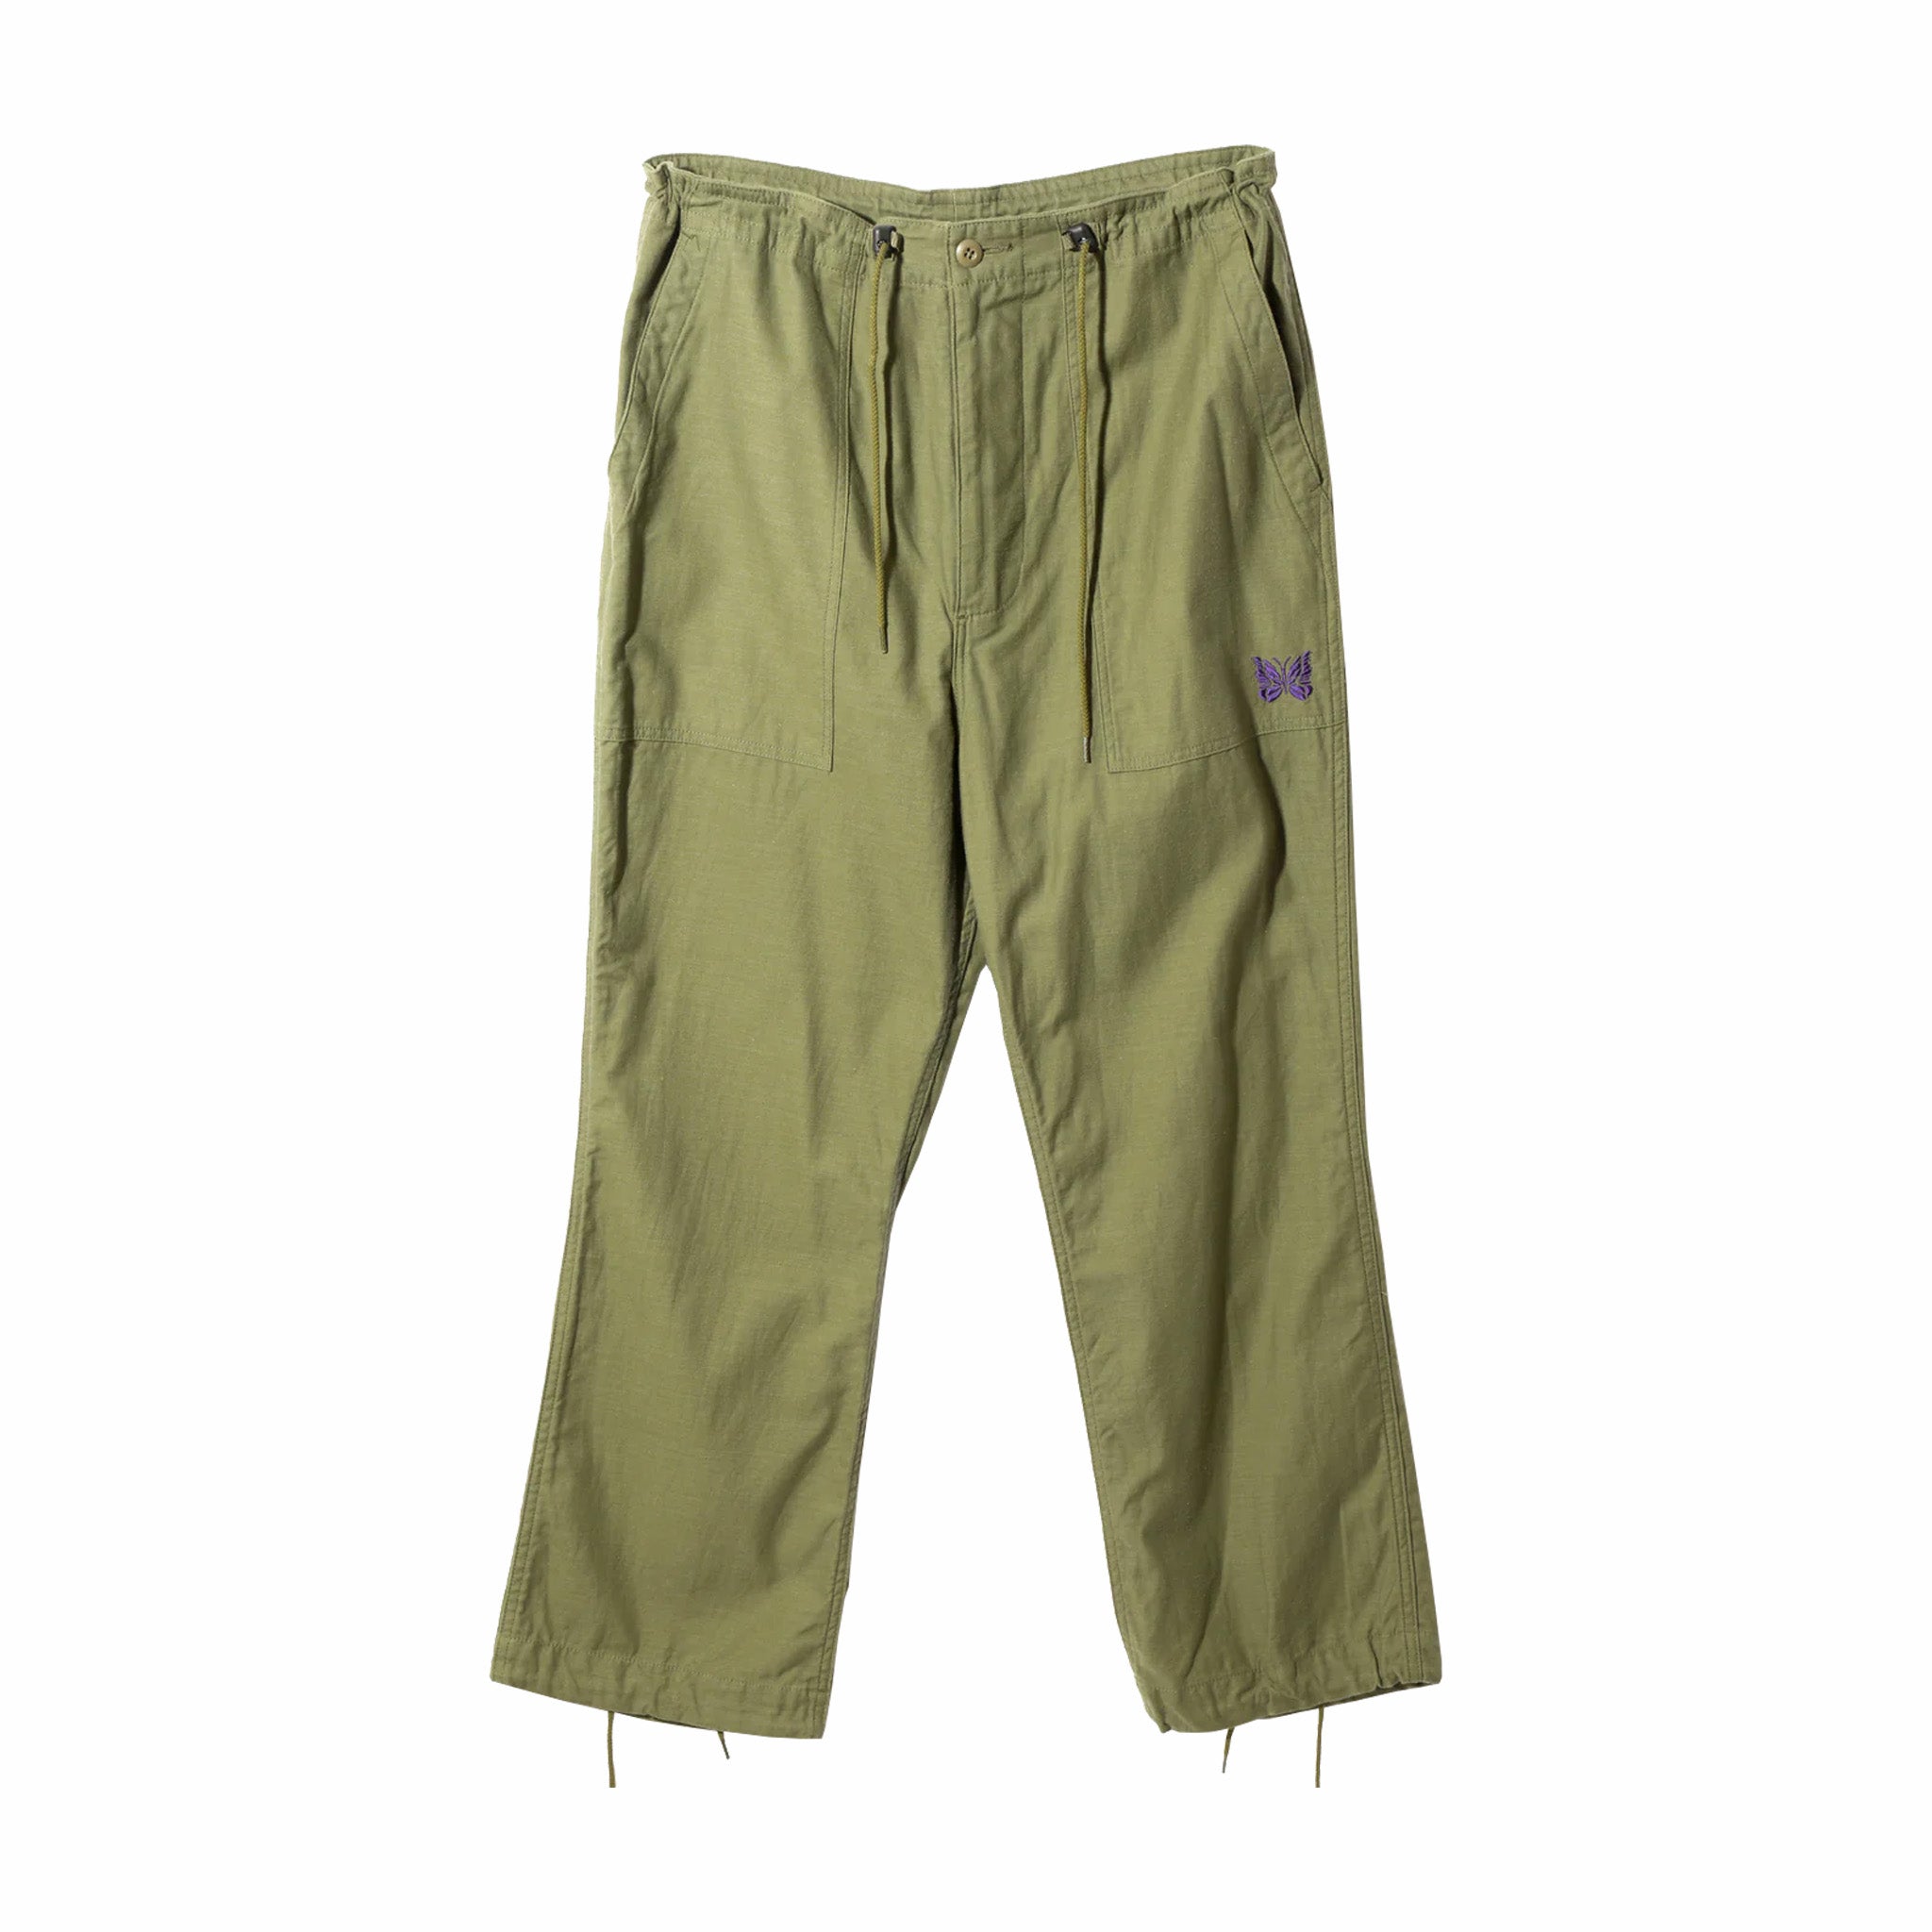 Needles String Fatigue Pant - Back Sateen (Olive) - August Shop